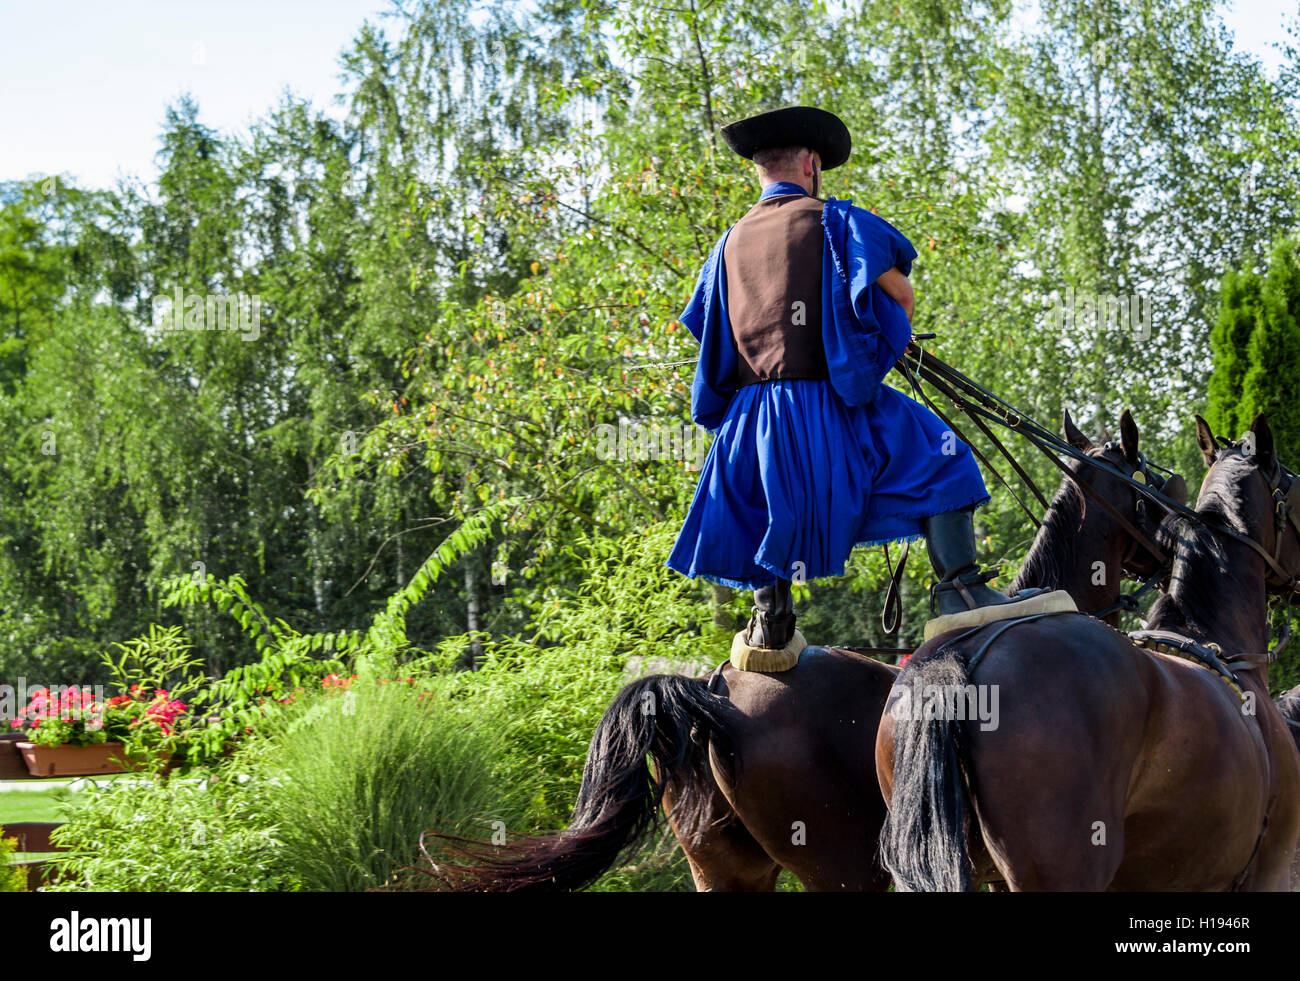 Hungarian Horsemen of the Puszta. Known as csikós or cowboys. Stock Photo